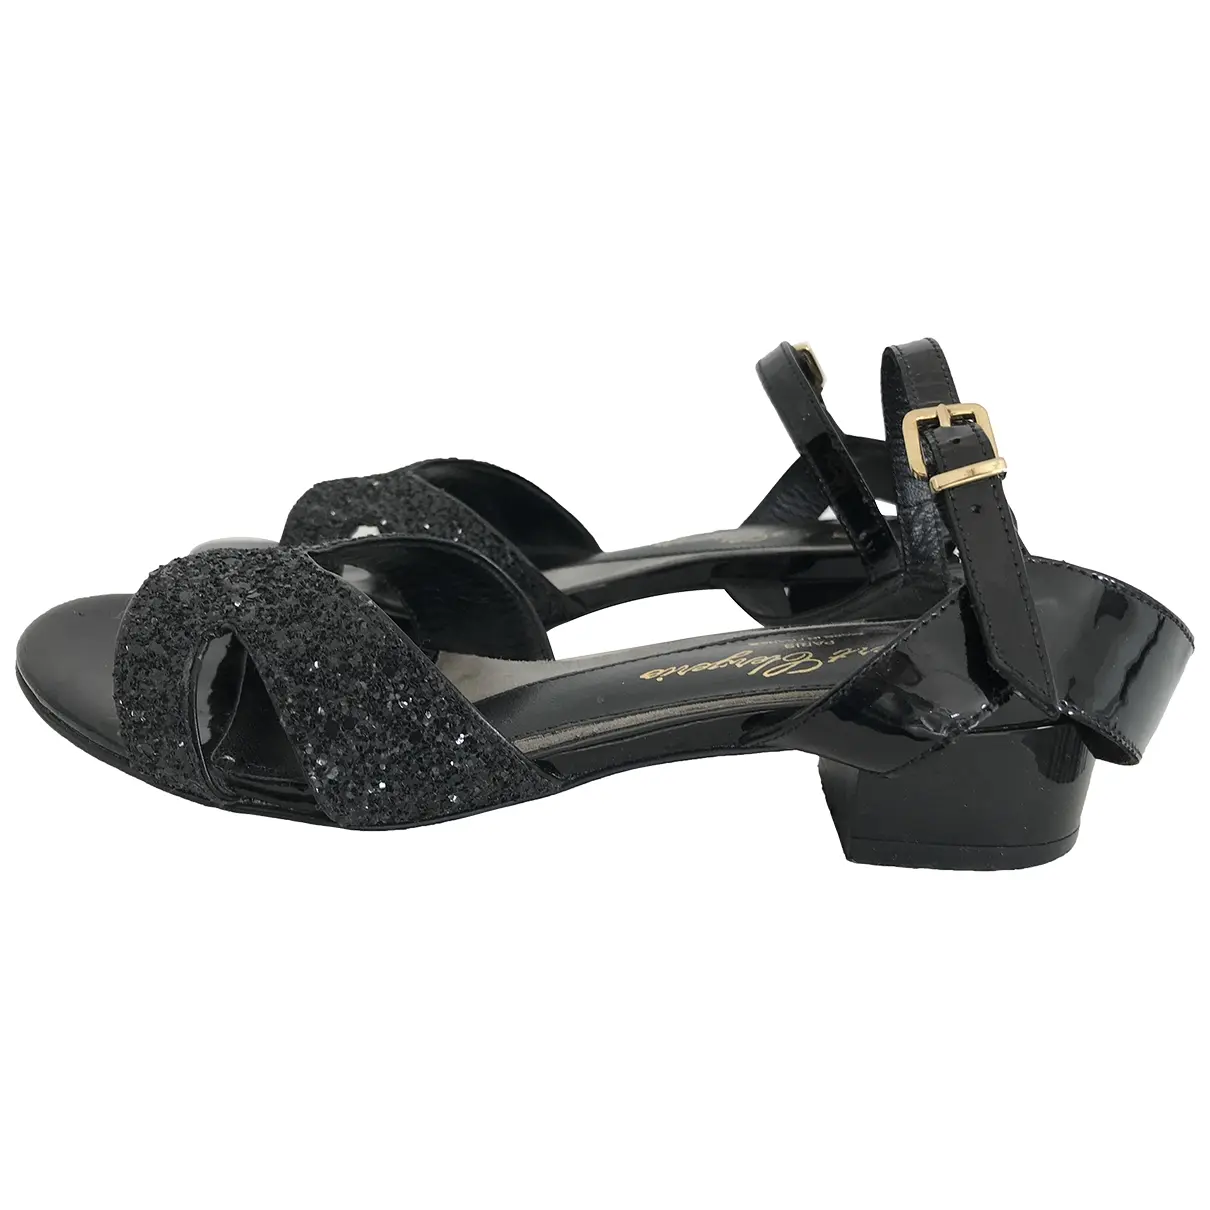 Patent leather sandal Robert Clergerie